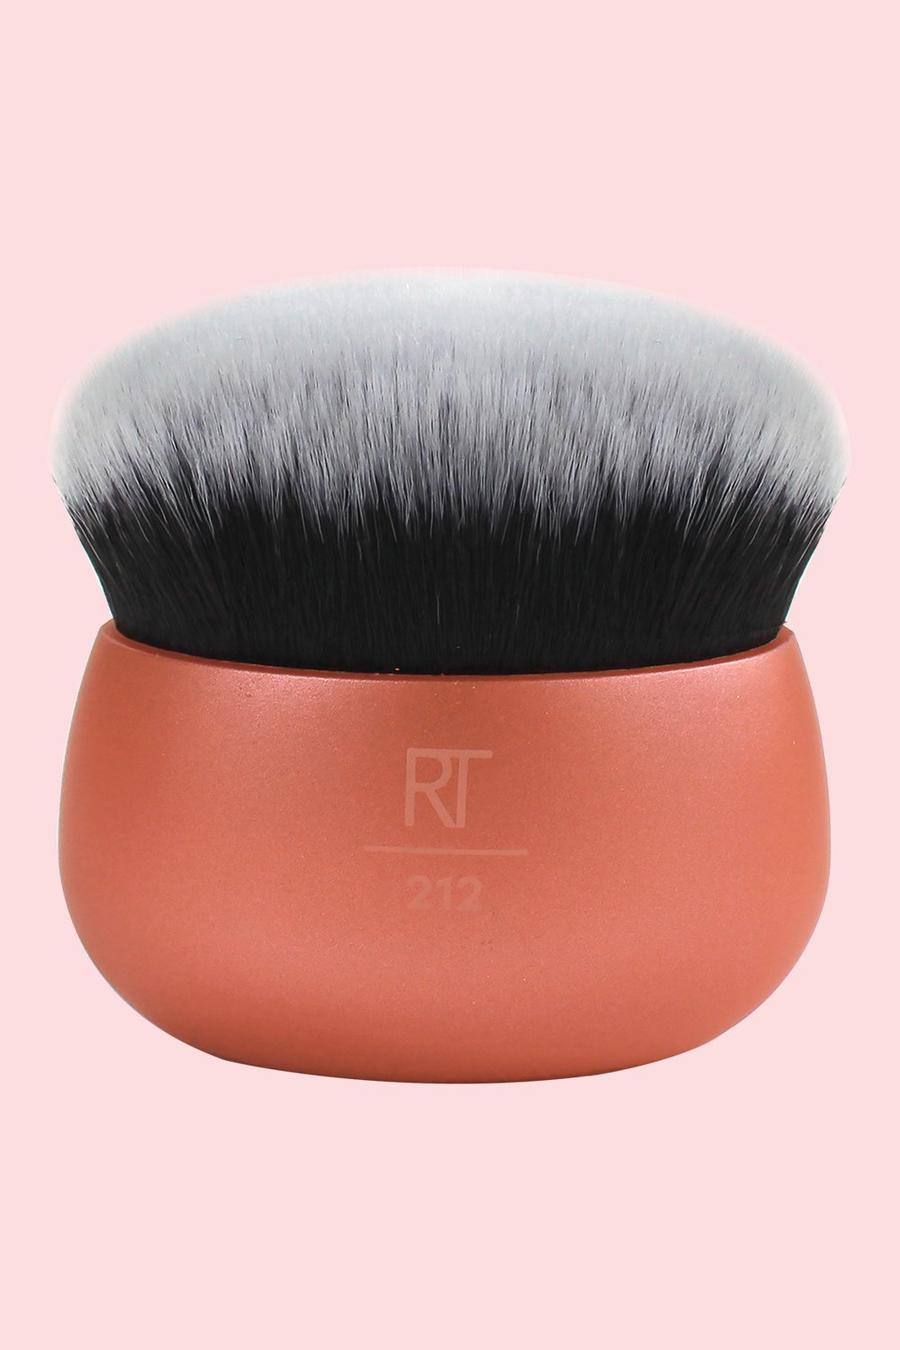 Pink Real Techniques Face & Body Blender Makeup Brush